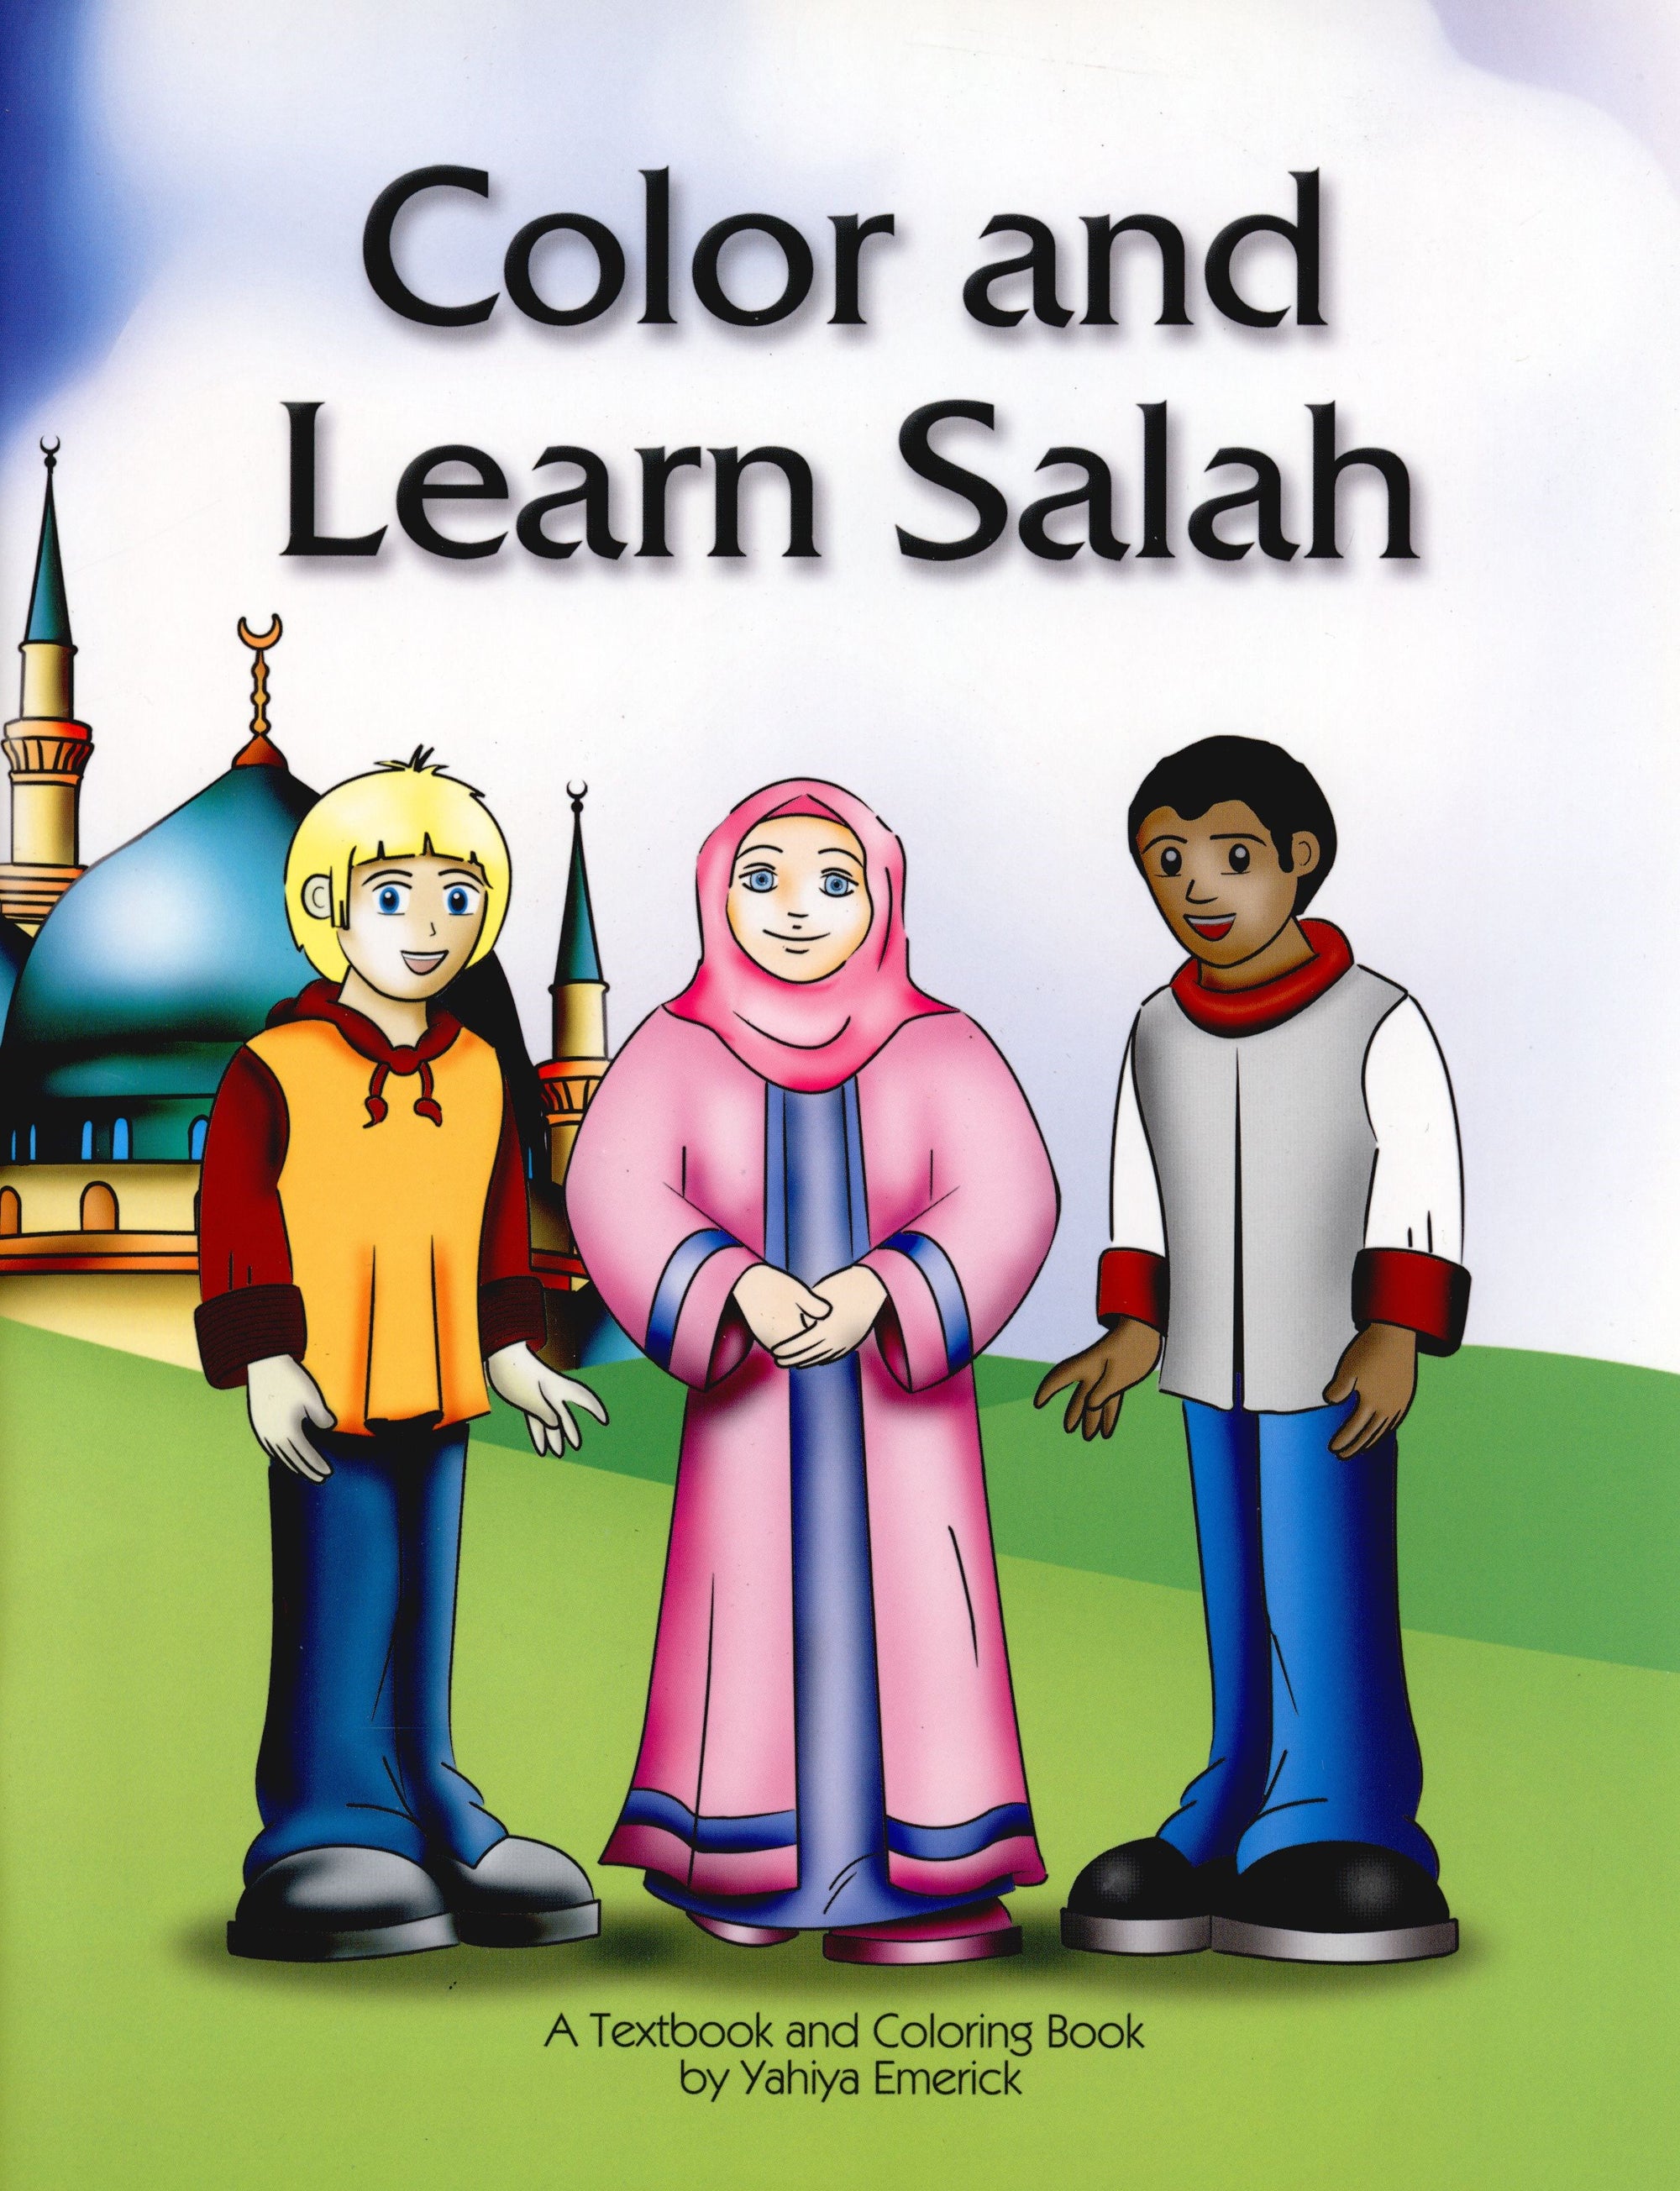 Color and Learn Salah